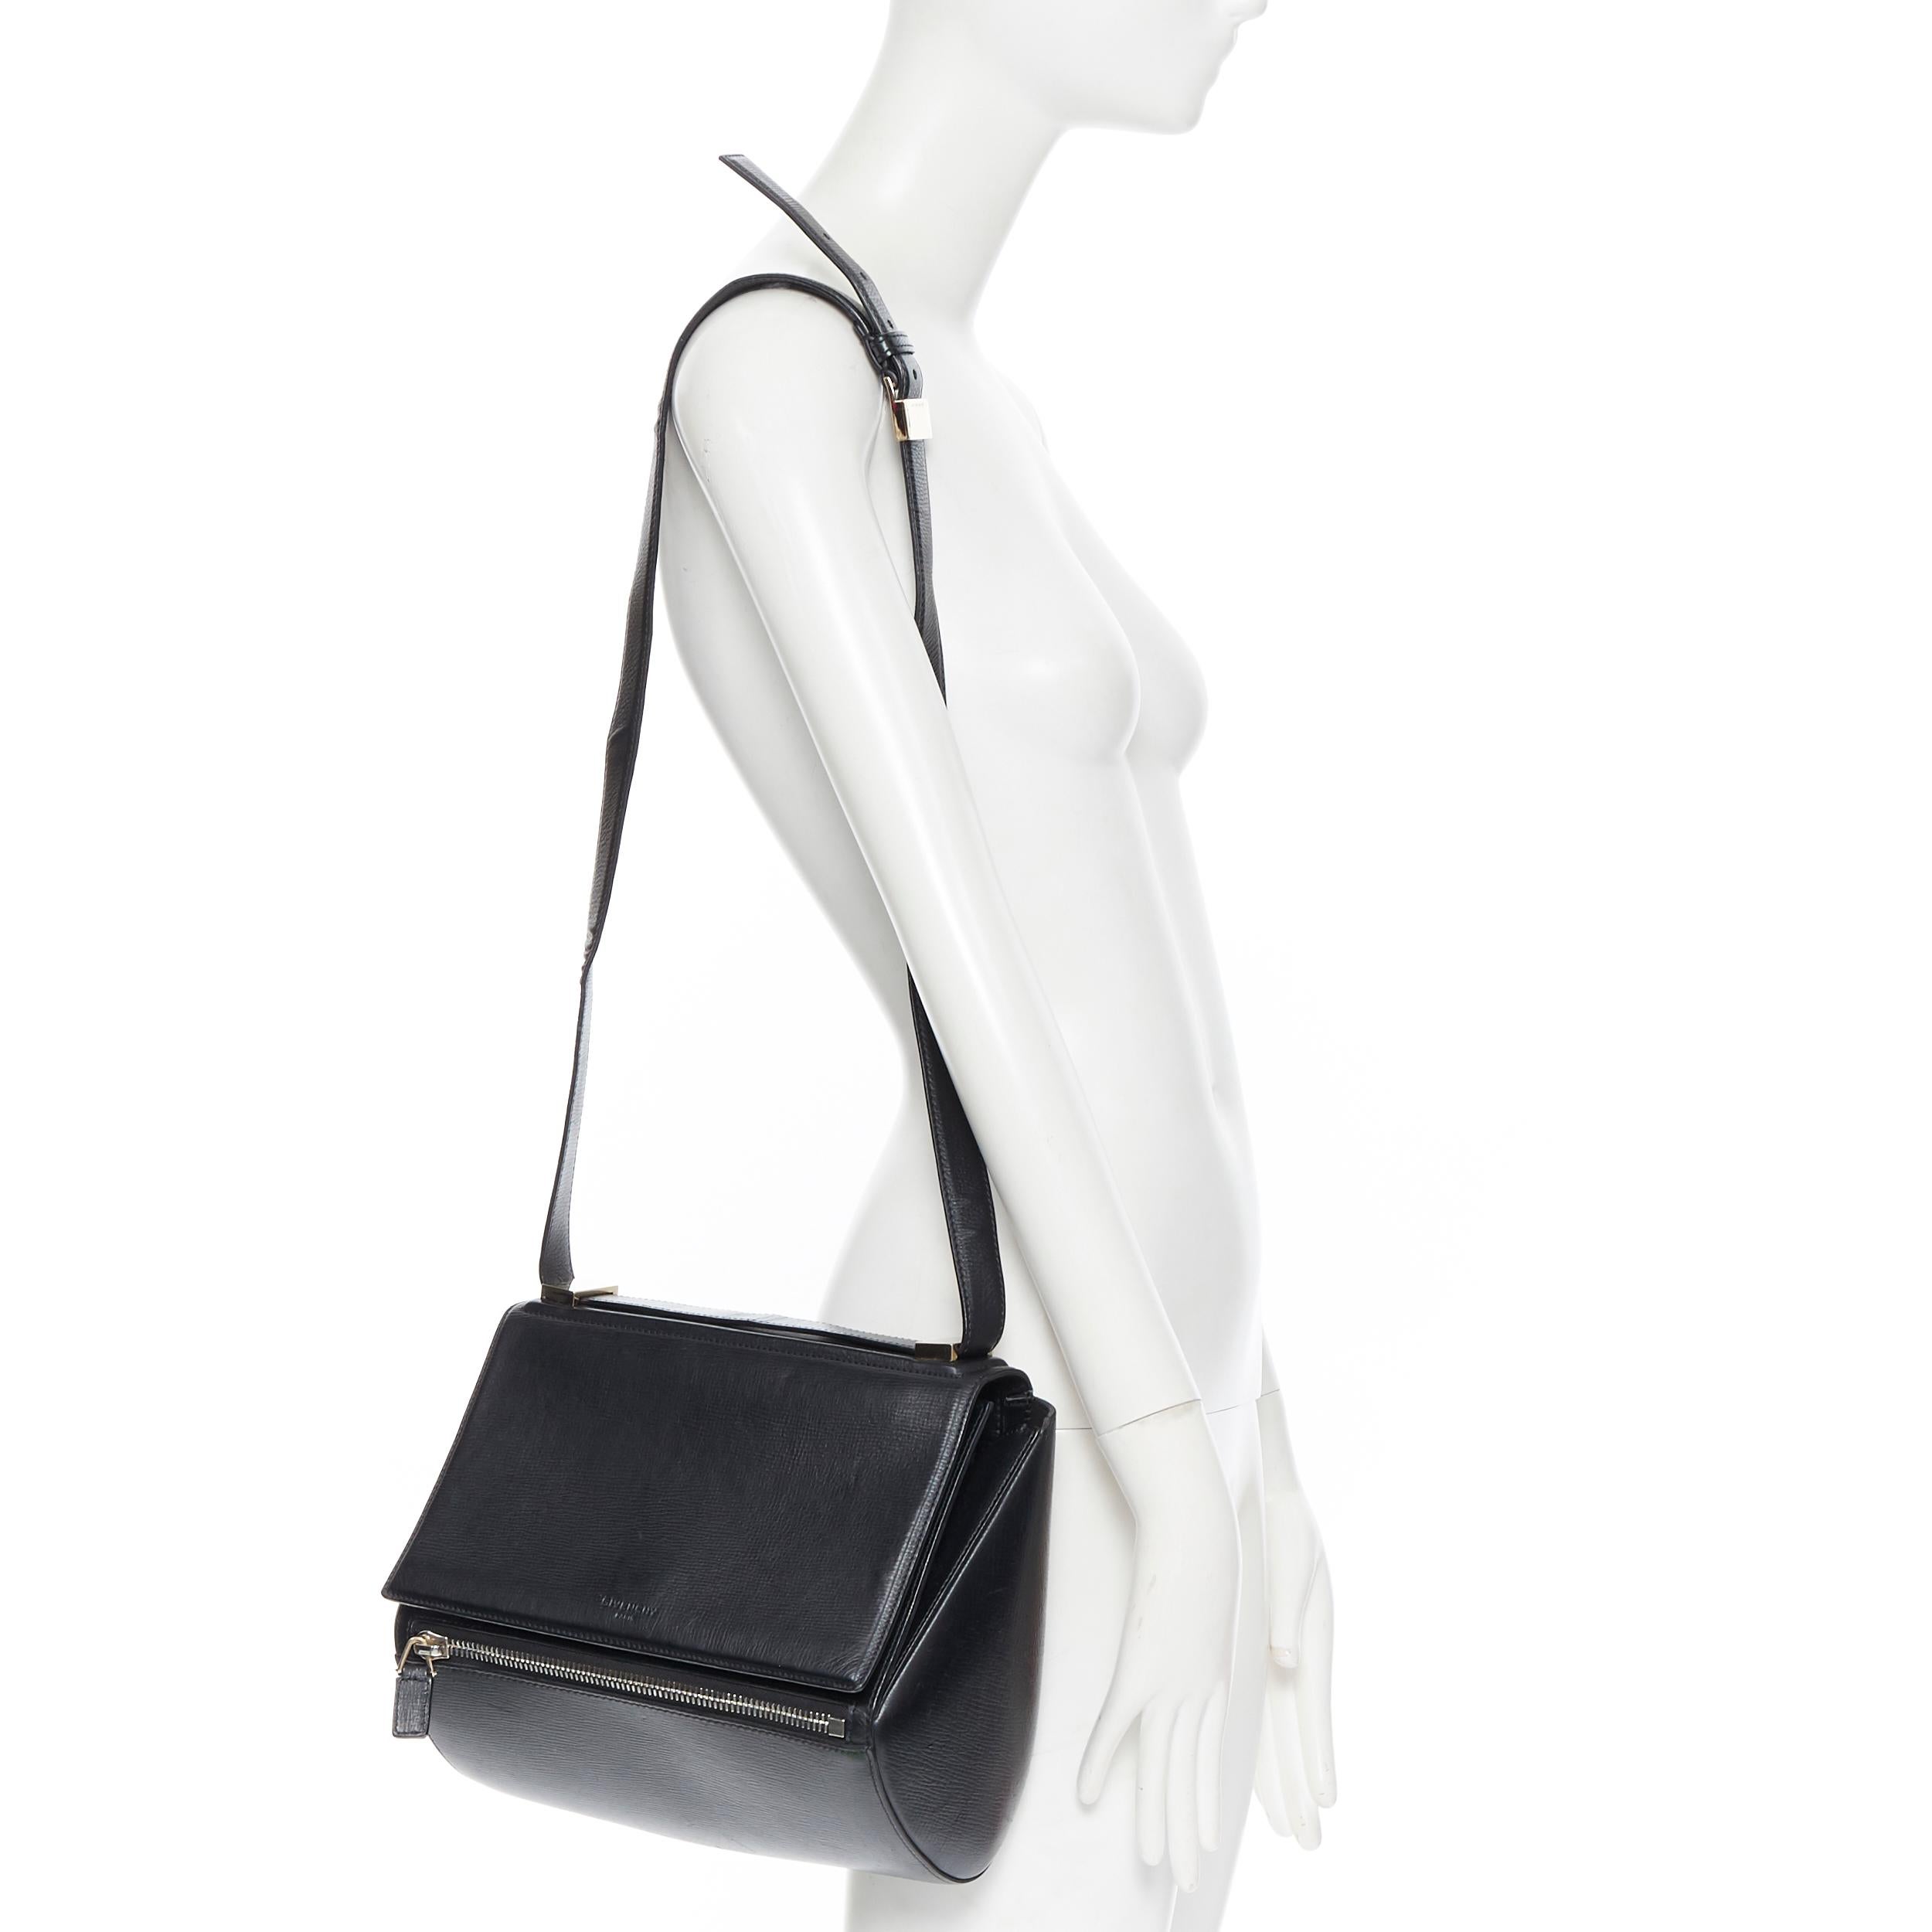 GIVENCHY Pandora Box black leather flap front zip structured crossbody bag
Brand: Givenchy
Model Name / Style: Pandora Box
Material: Leather
Color: Black
Pattern: Solid
Closure: Clasp
Extra Detail: Concealed push clasp flap front. Front zipper